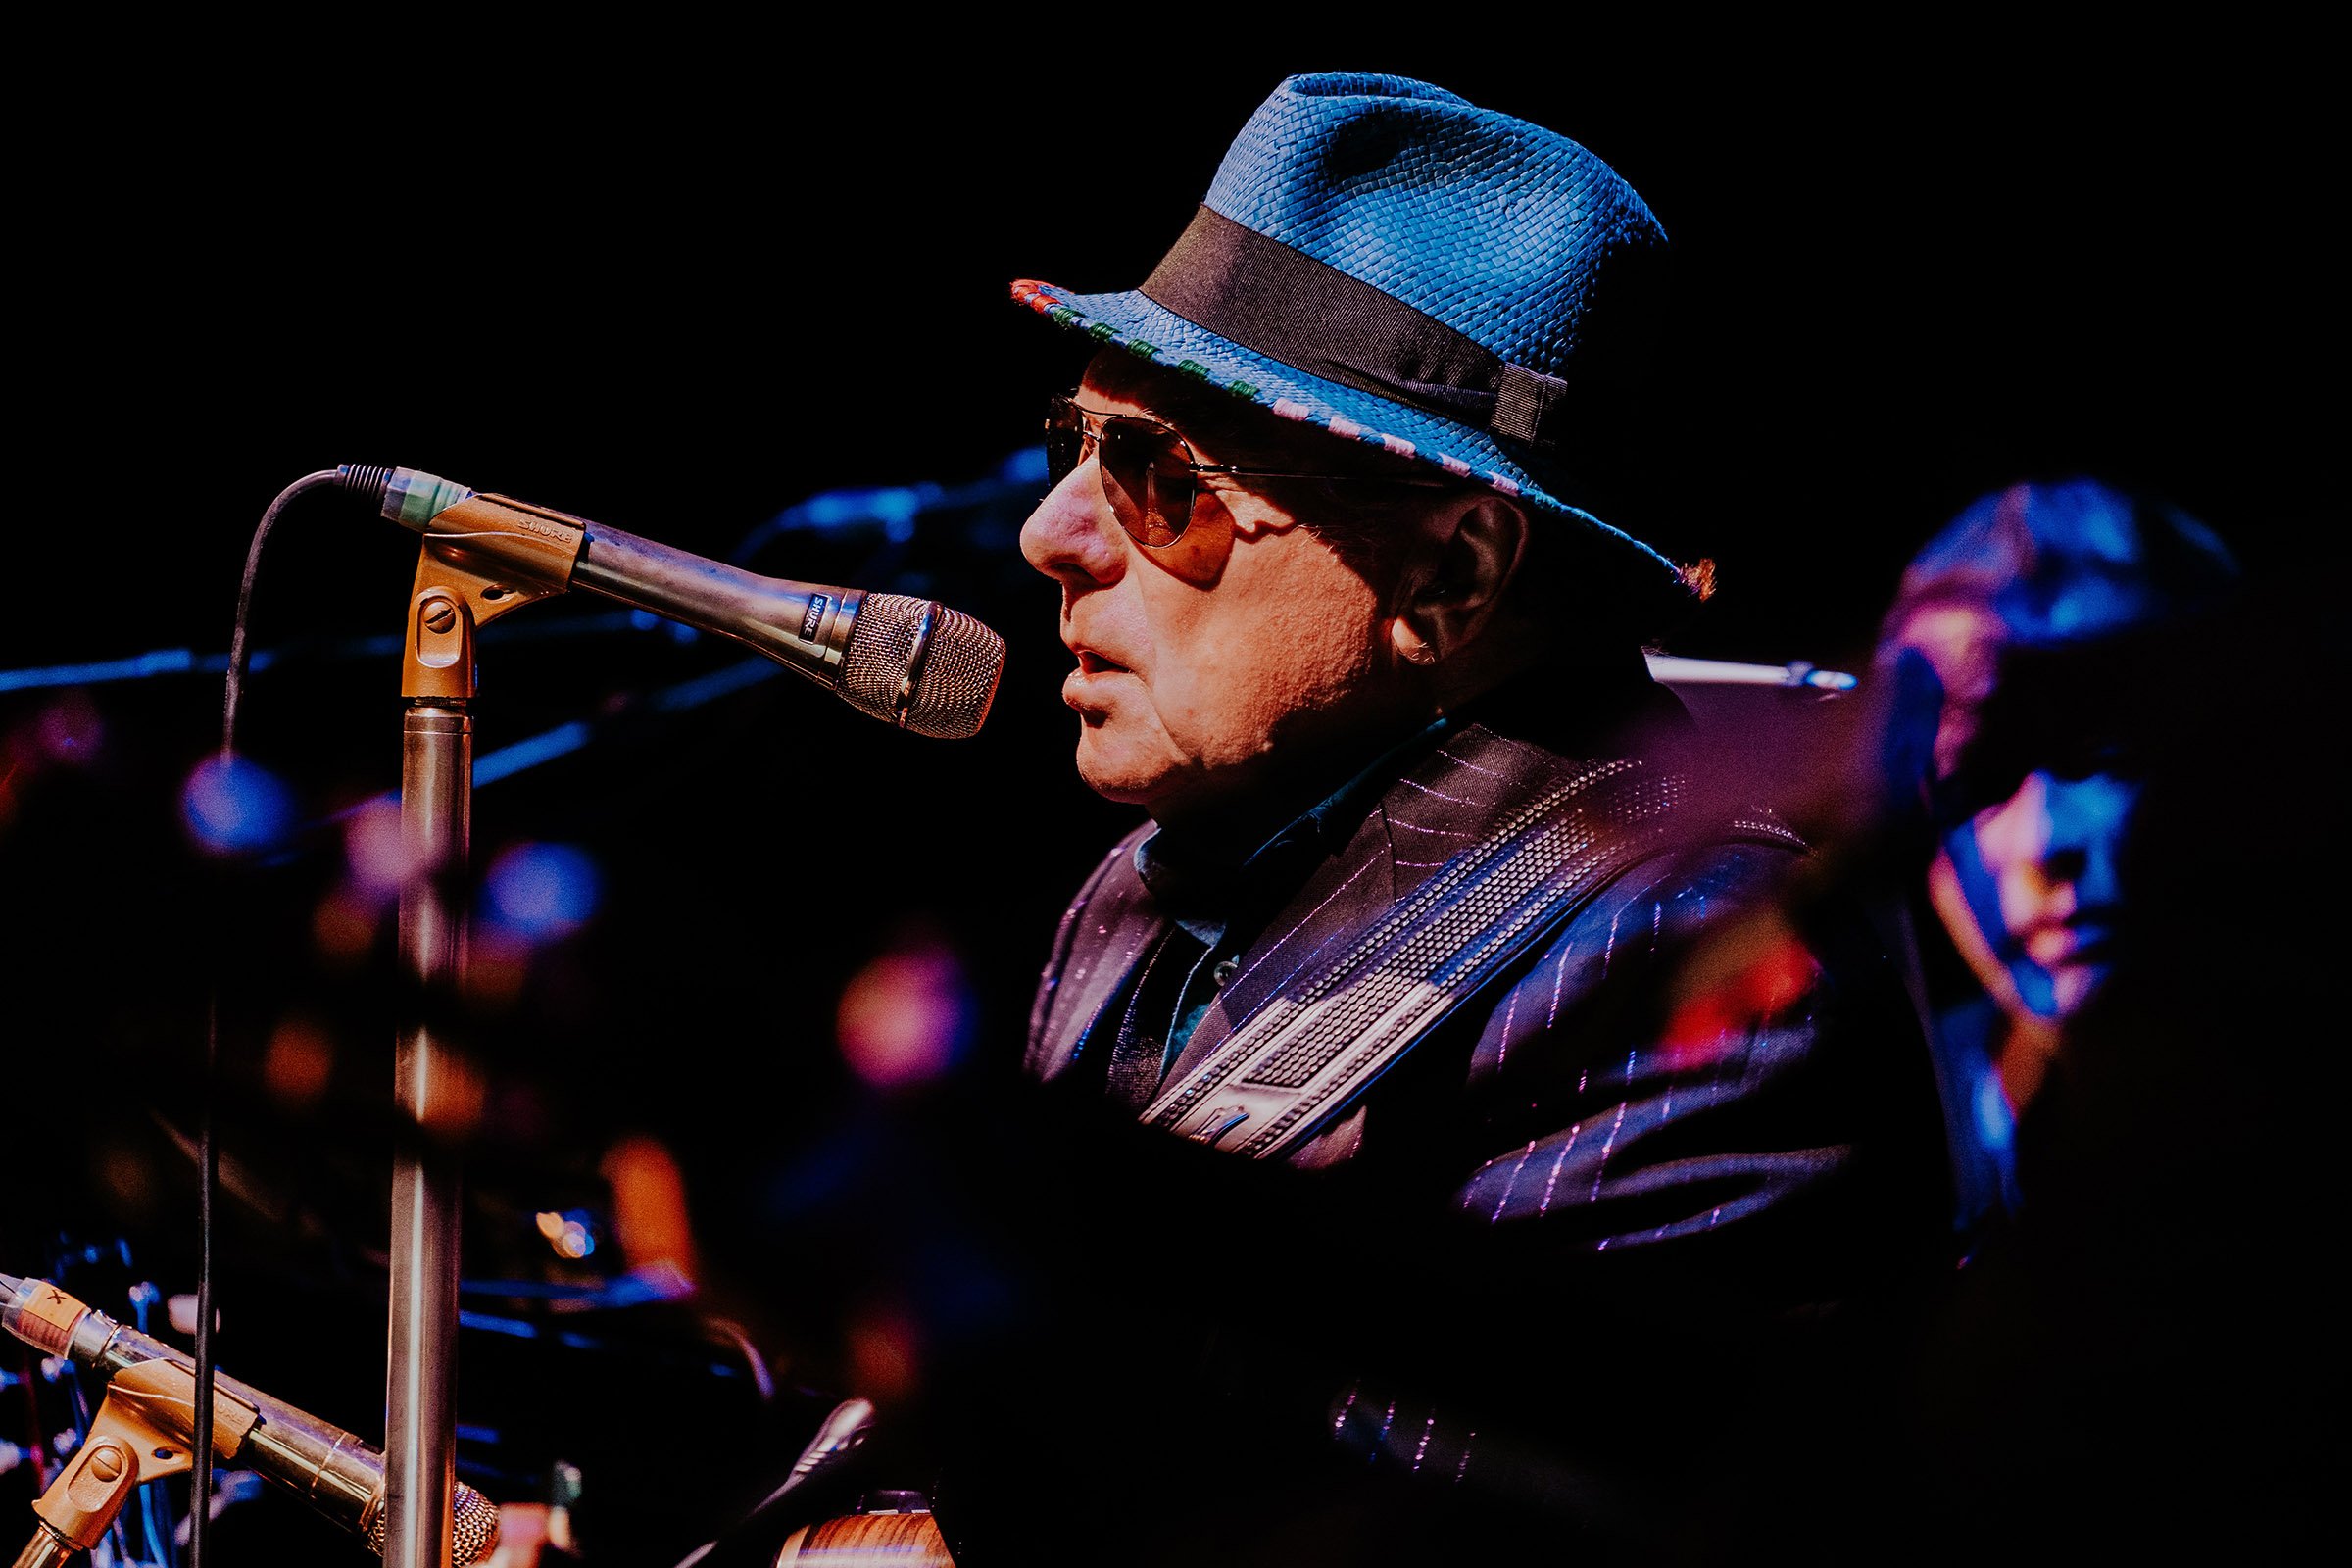 Sir VAN MORRISON returns to the Millennium Forum on Sunday 10th May as part of The City of Derry Jazz Festival 